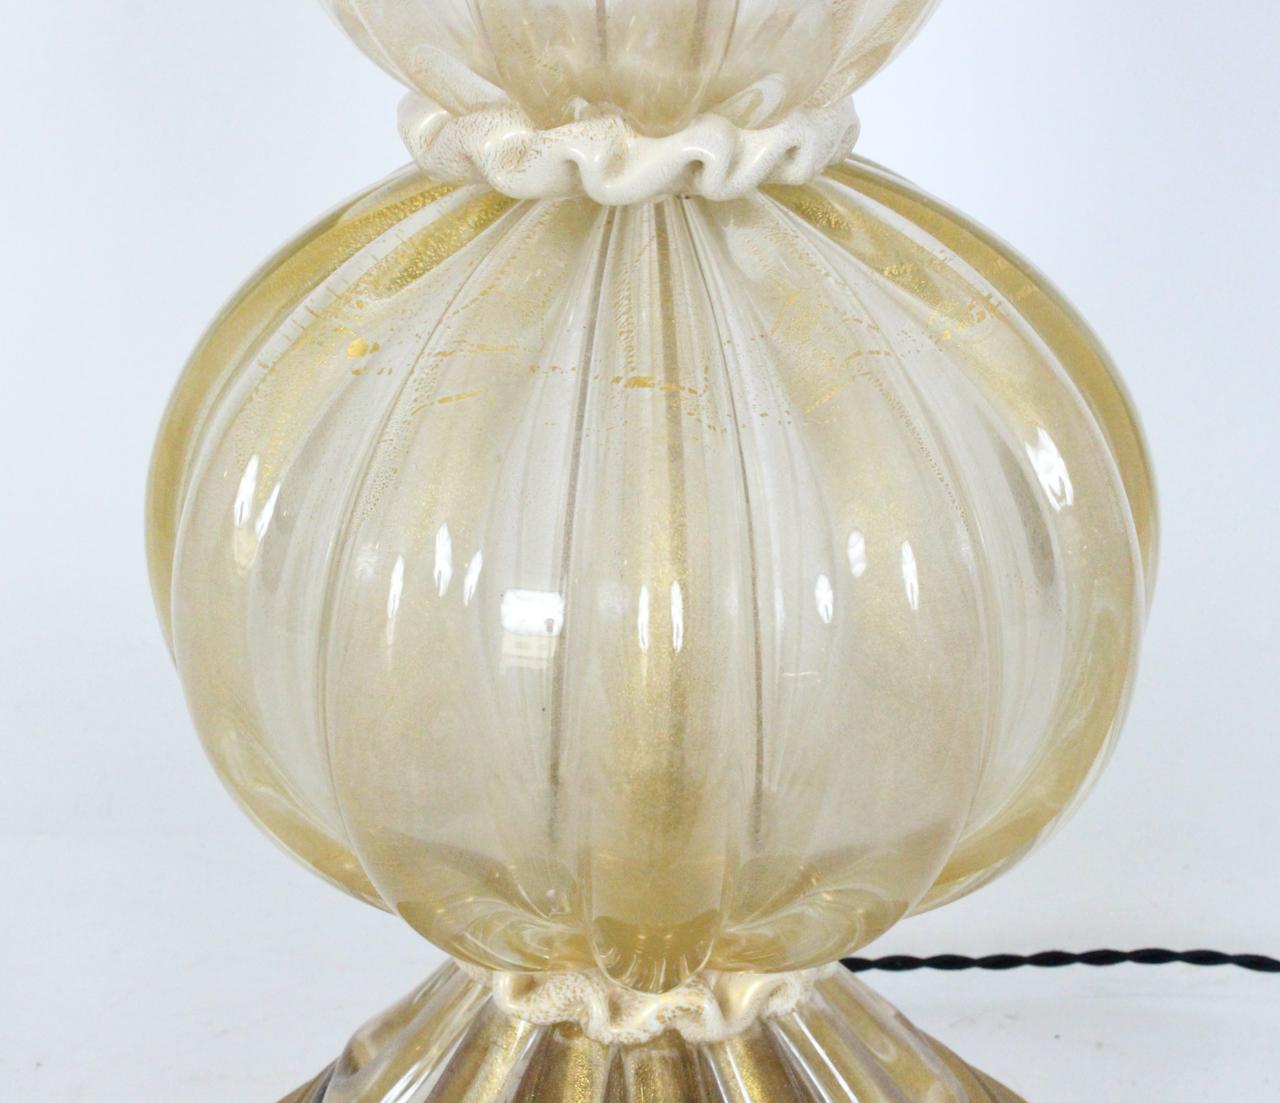 Substantial Paul Hanson White & Gold Murano Glass Table Lamp, 1960's For Sale 4